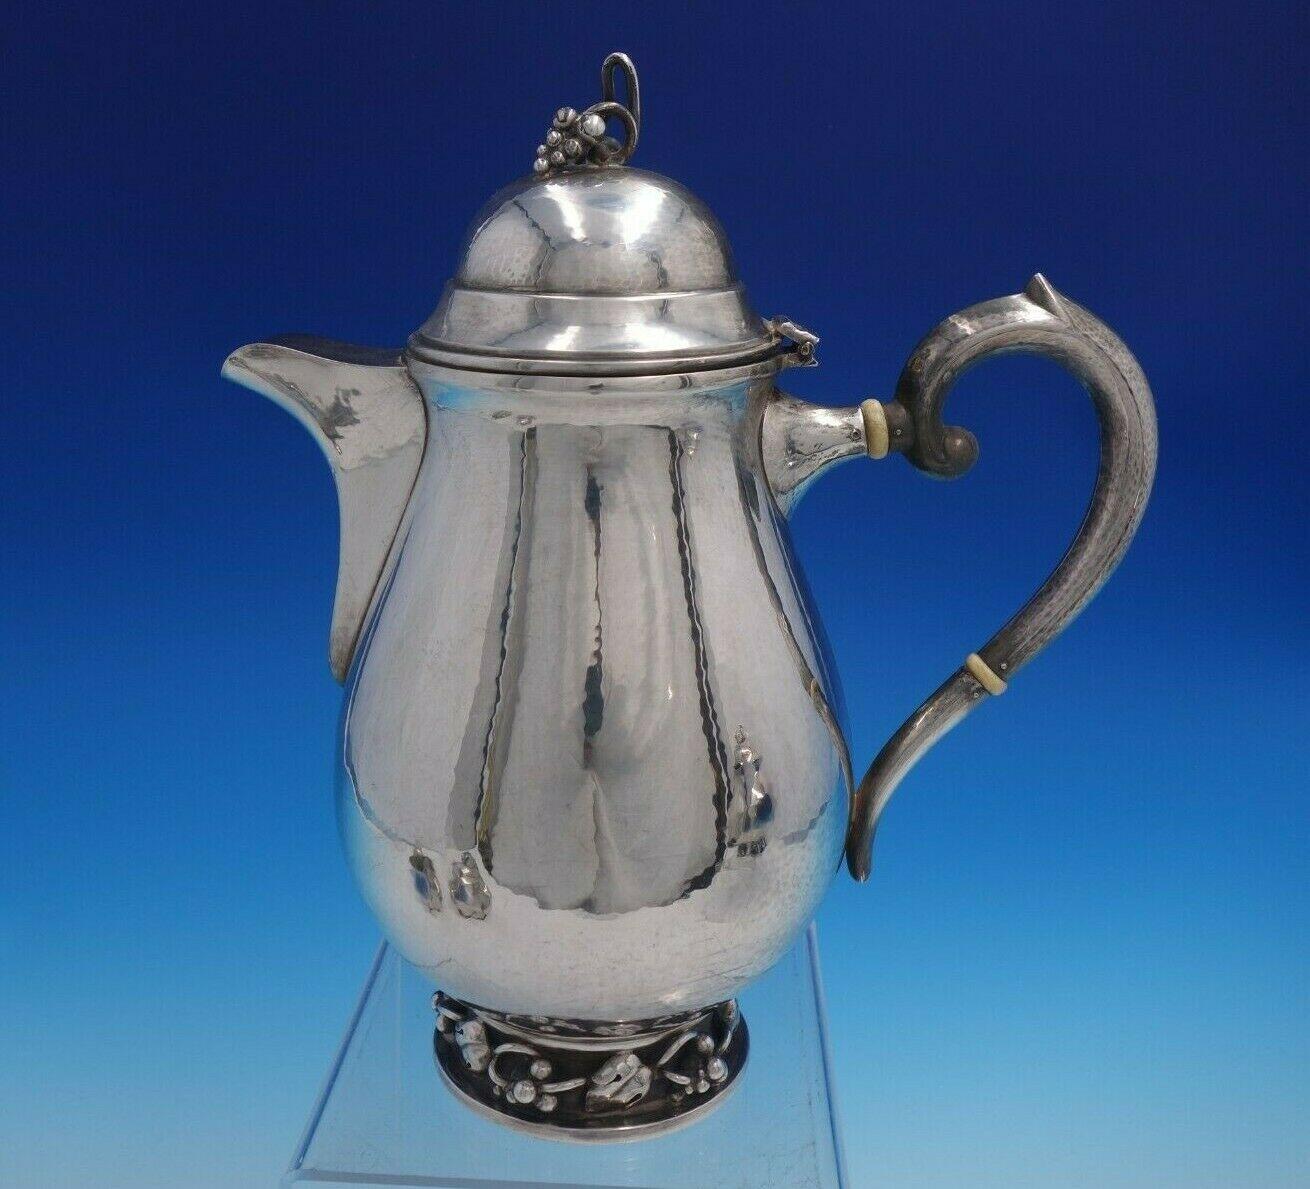 DGH goldsmith

Beautiful DGH goldsmith sterling silver 4-piece tea set. This set is handwrought and features a grape and leaf motif. It includes:

1 - Coffee pot: Measures 8